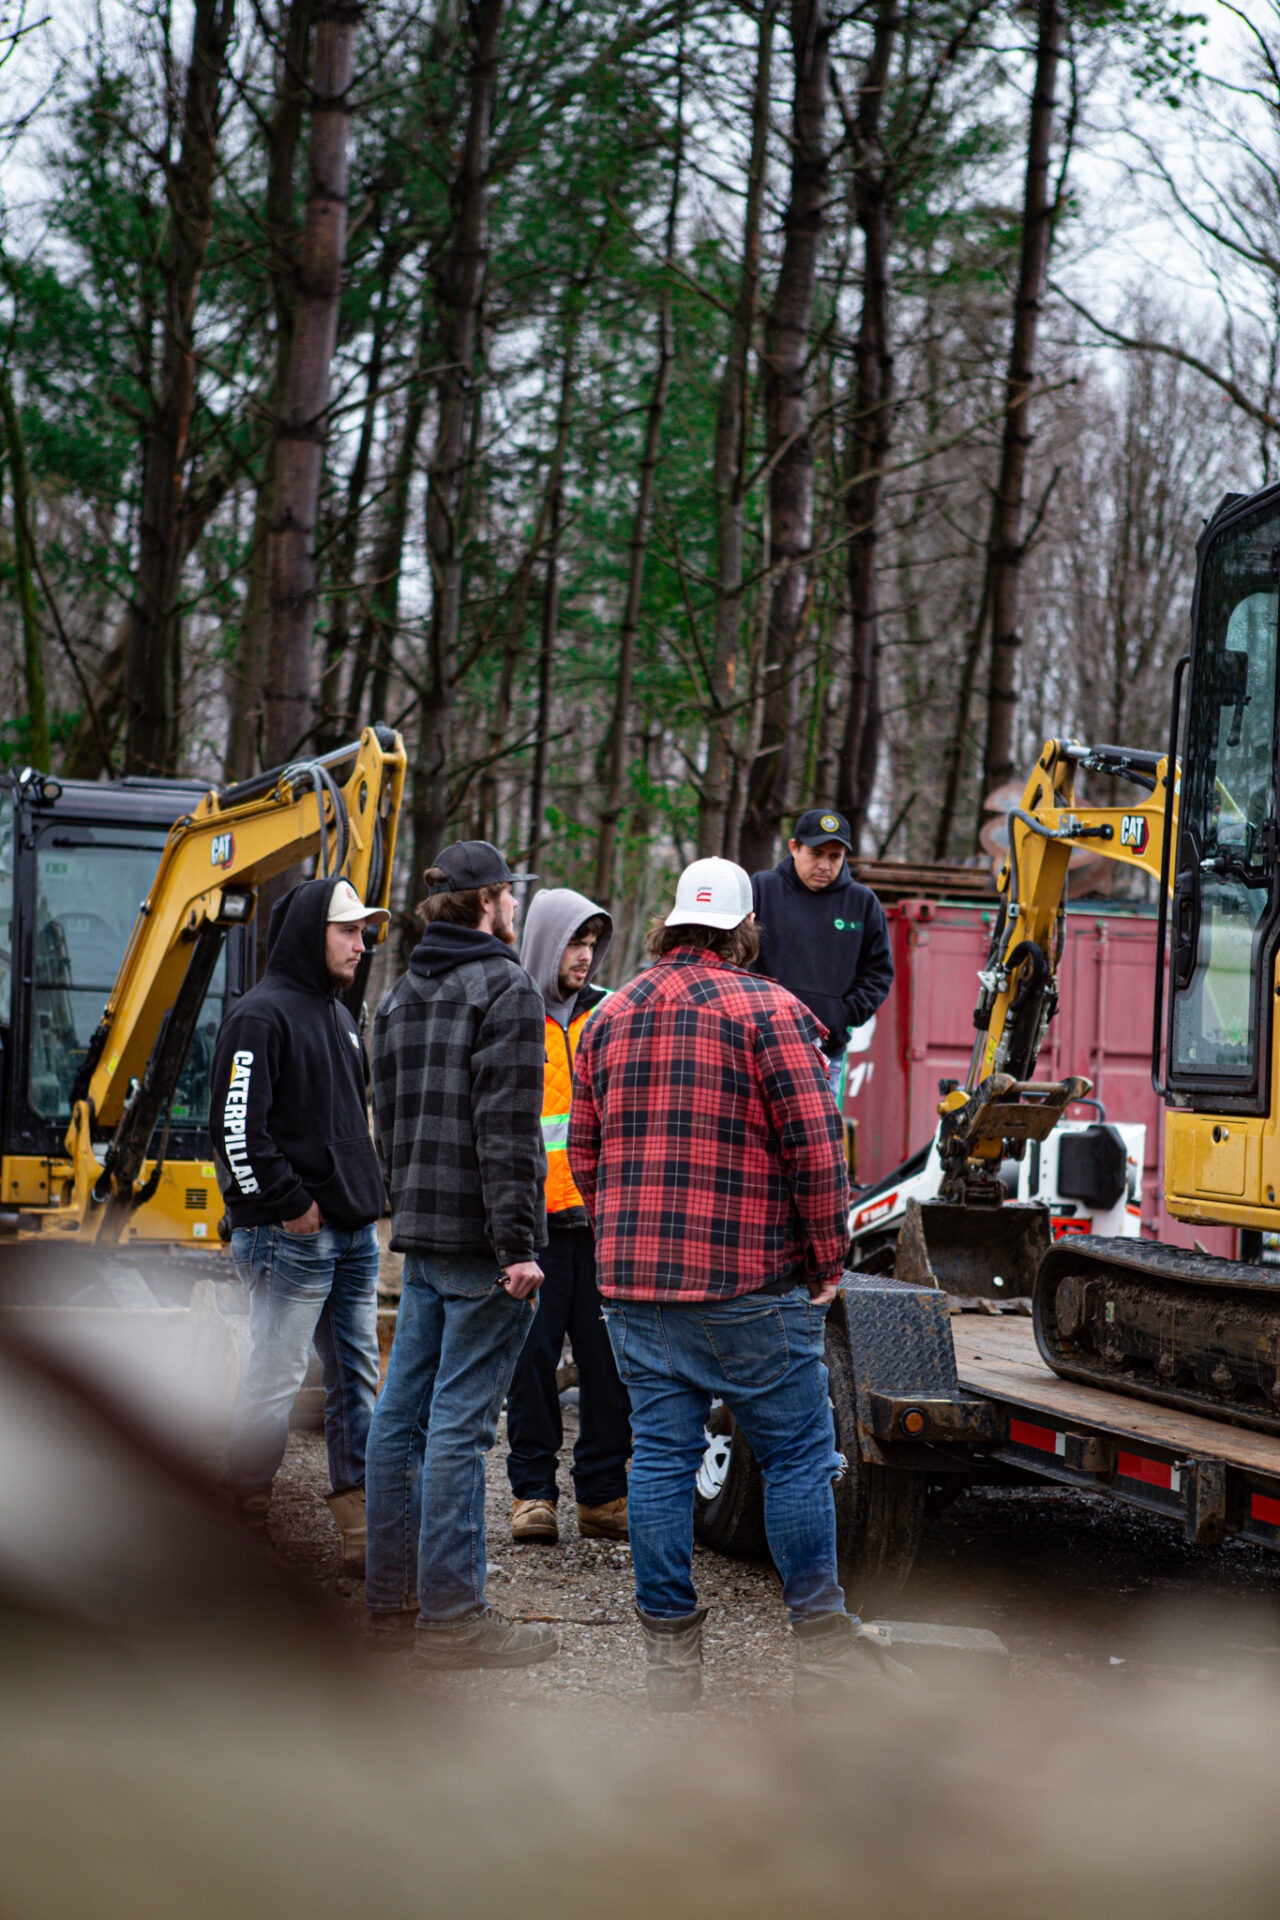 A group of people, some in high-visibility vests, gather near a yellow excavator in a wooded area, possibly discussing work-related matters.